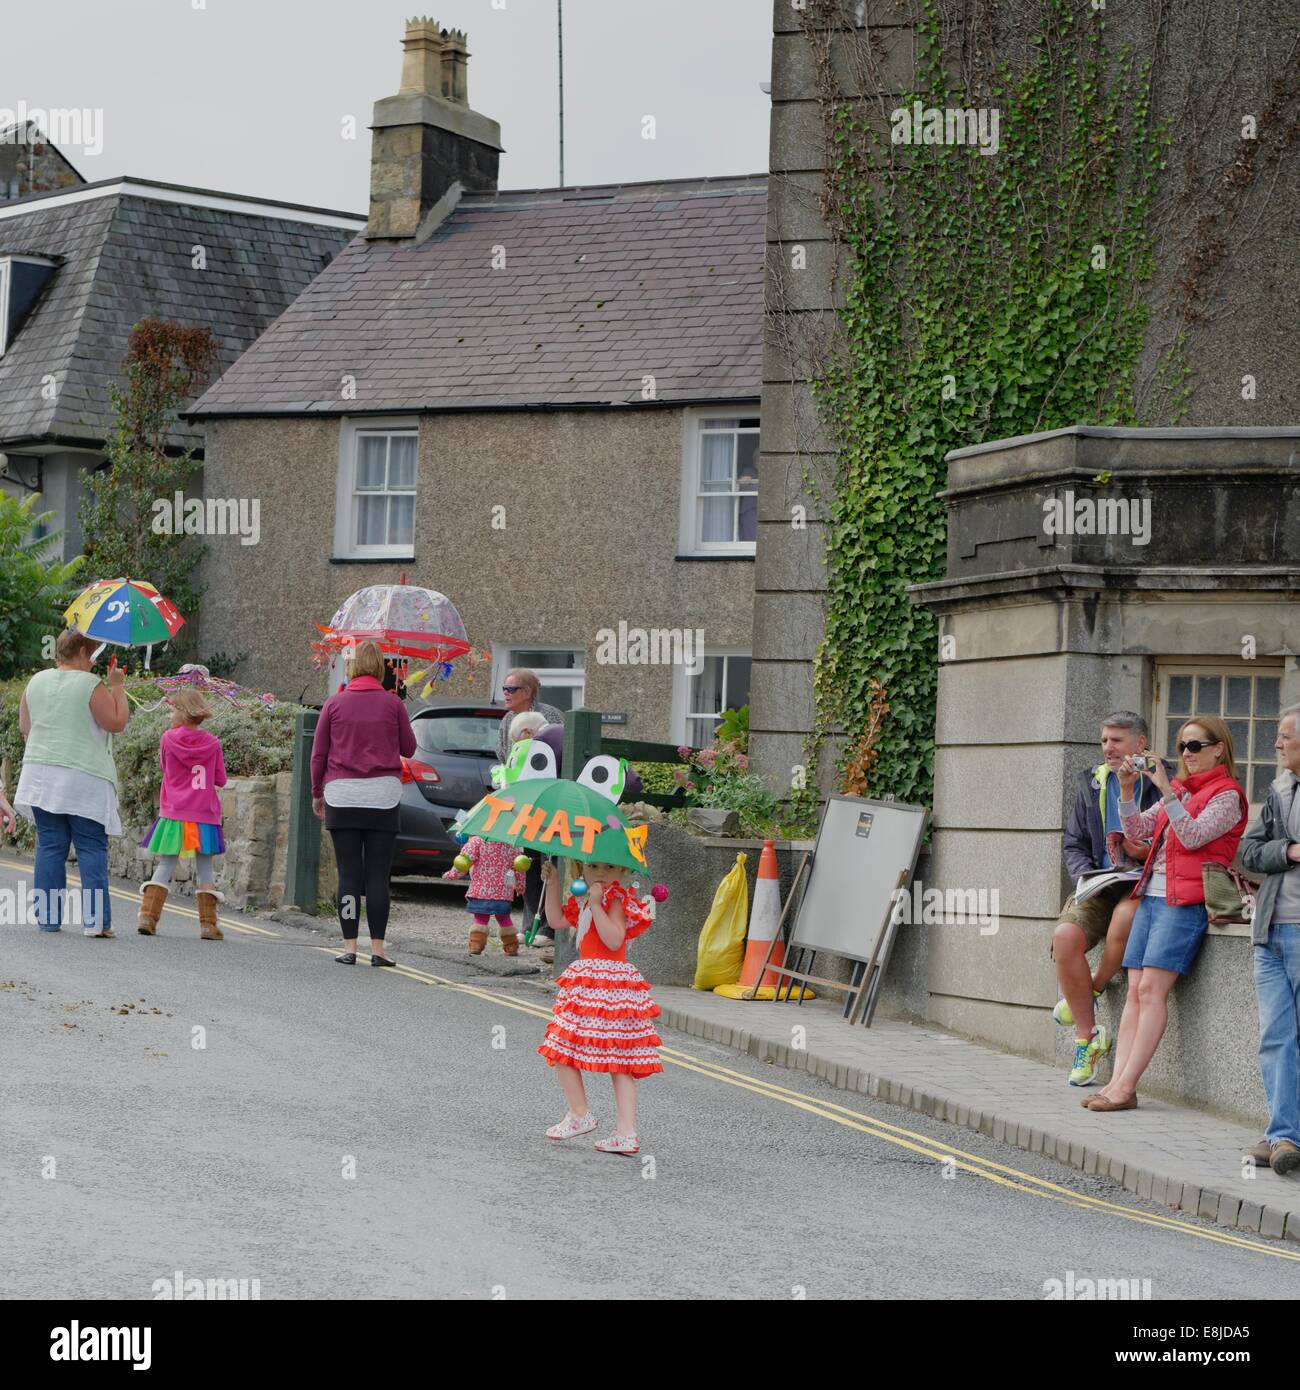 A little girl lost looking for mother during the opening procession that marks the beginning the Abersoch Jazz Festival 2014 Stock Photo